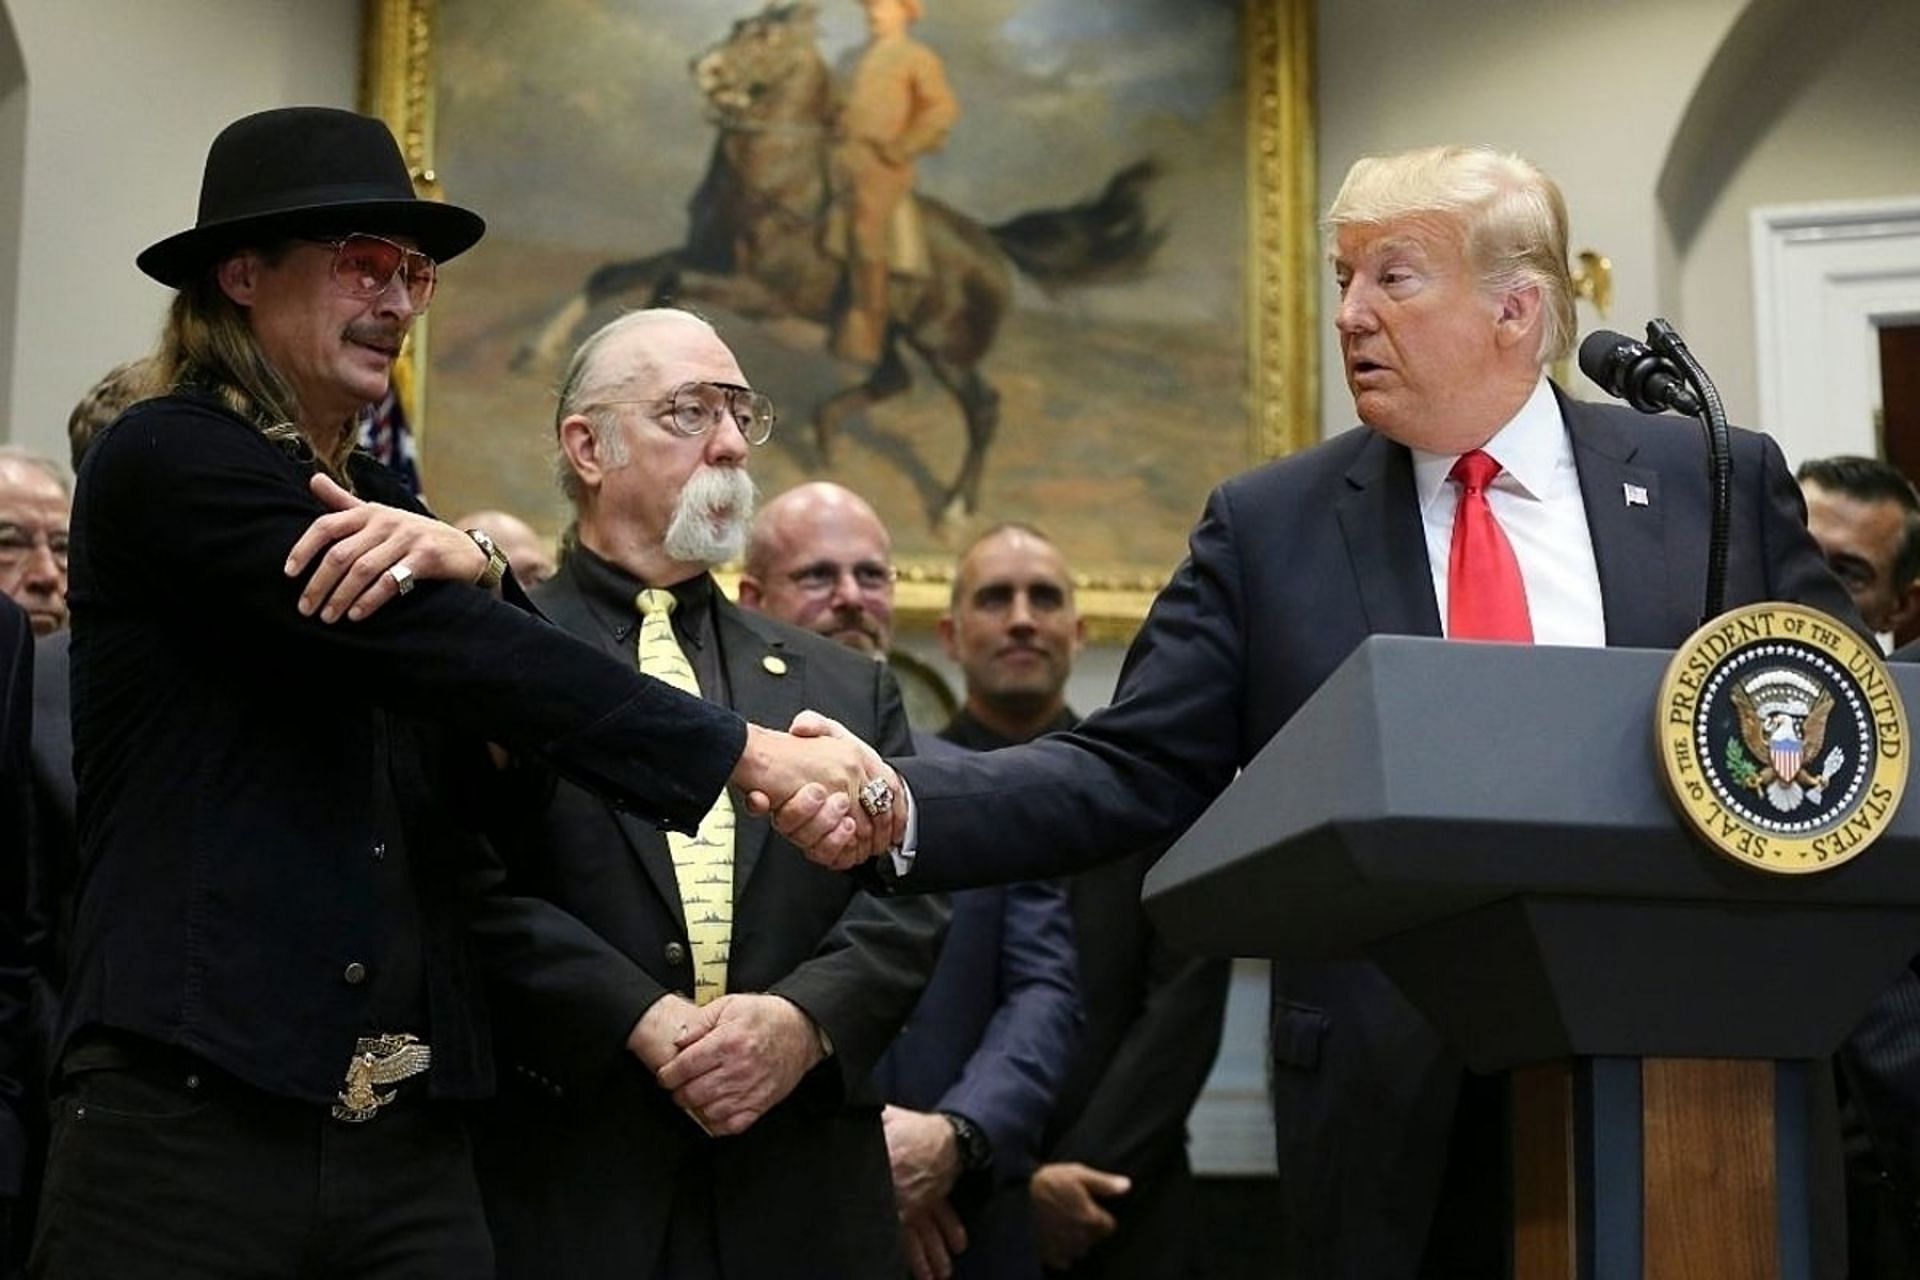 Kid Rock and Donald Trump (Image via Oliver Contreras/Getty Images)